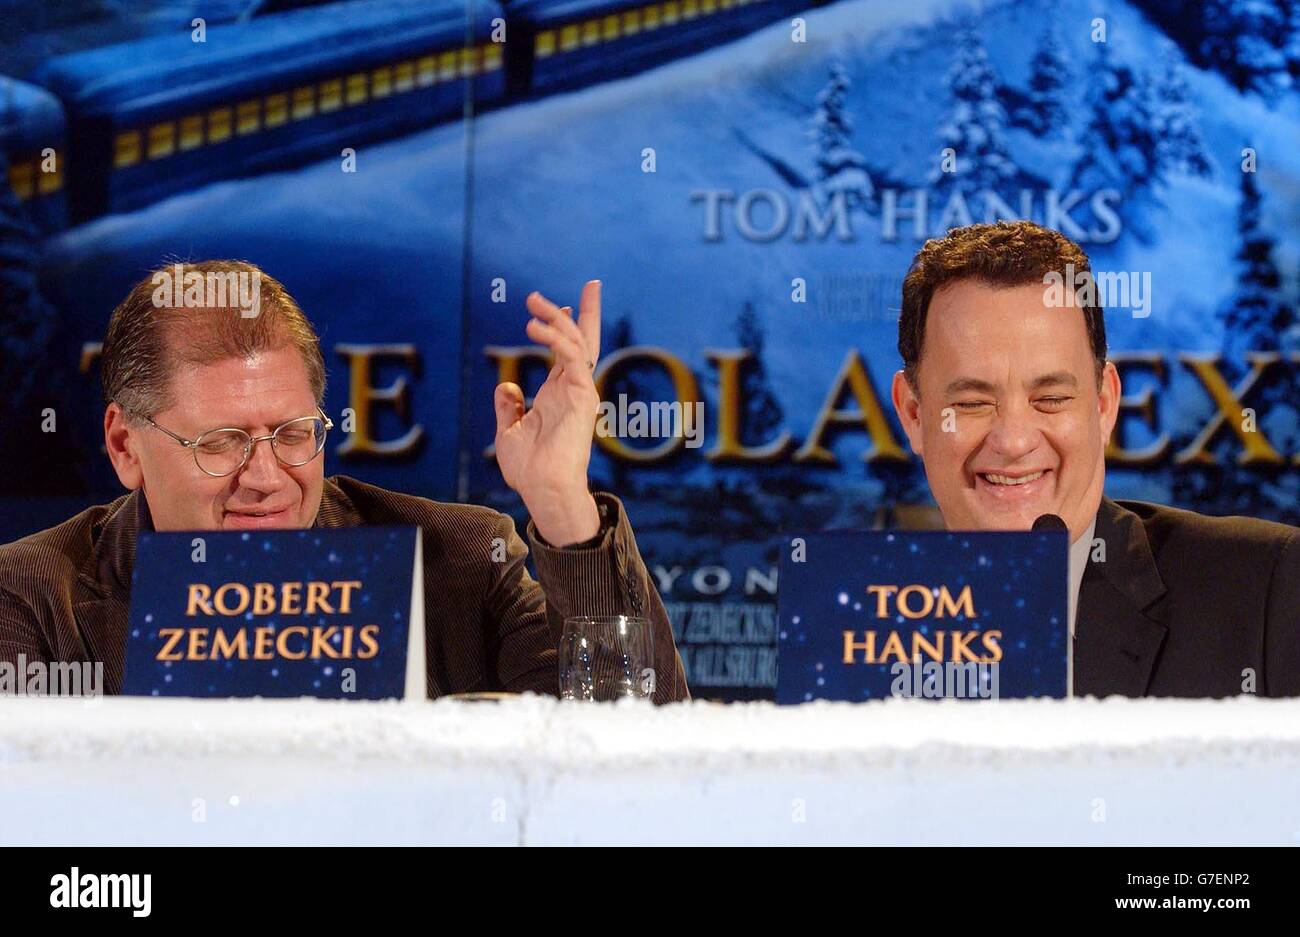 American actor Tom Hanks with film director Robert Zemeckis during a press conference for their latest film The Polar Express, held at the Dorchester Hotel, central London. Stock Photo